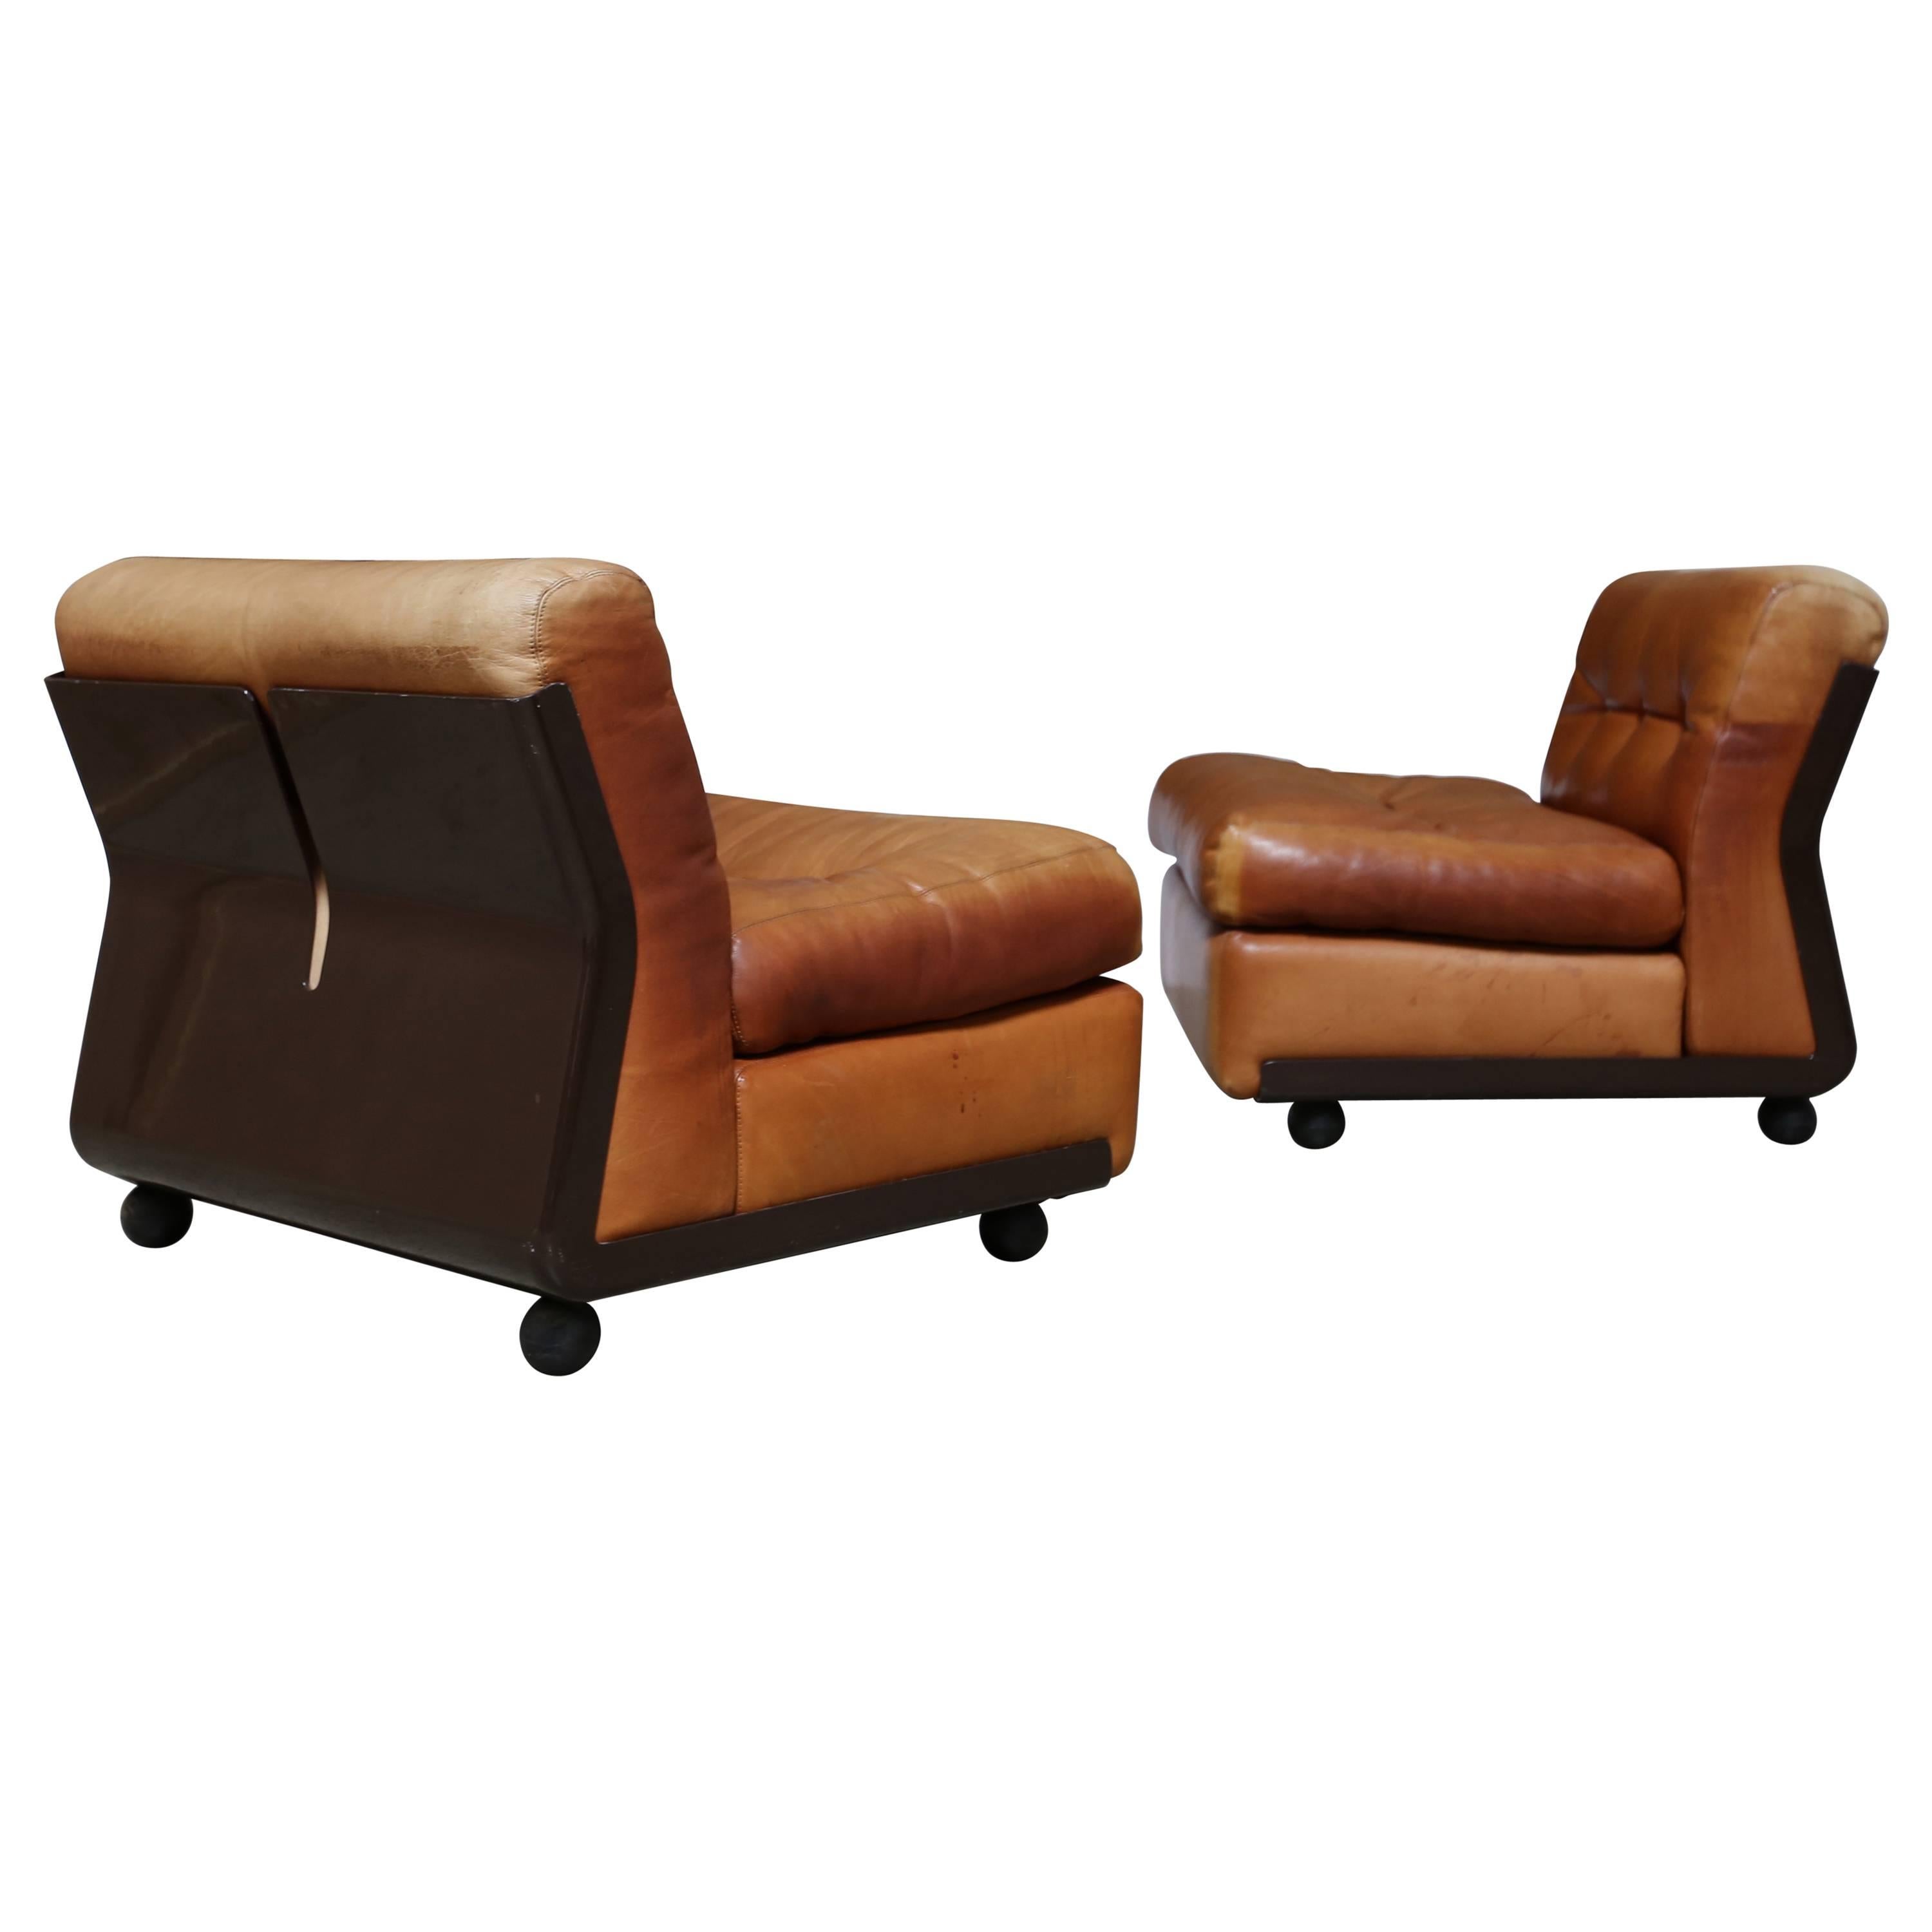 Pair of Leather "Amanta" Lounge Chairs by Mario Bellini